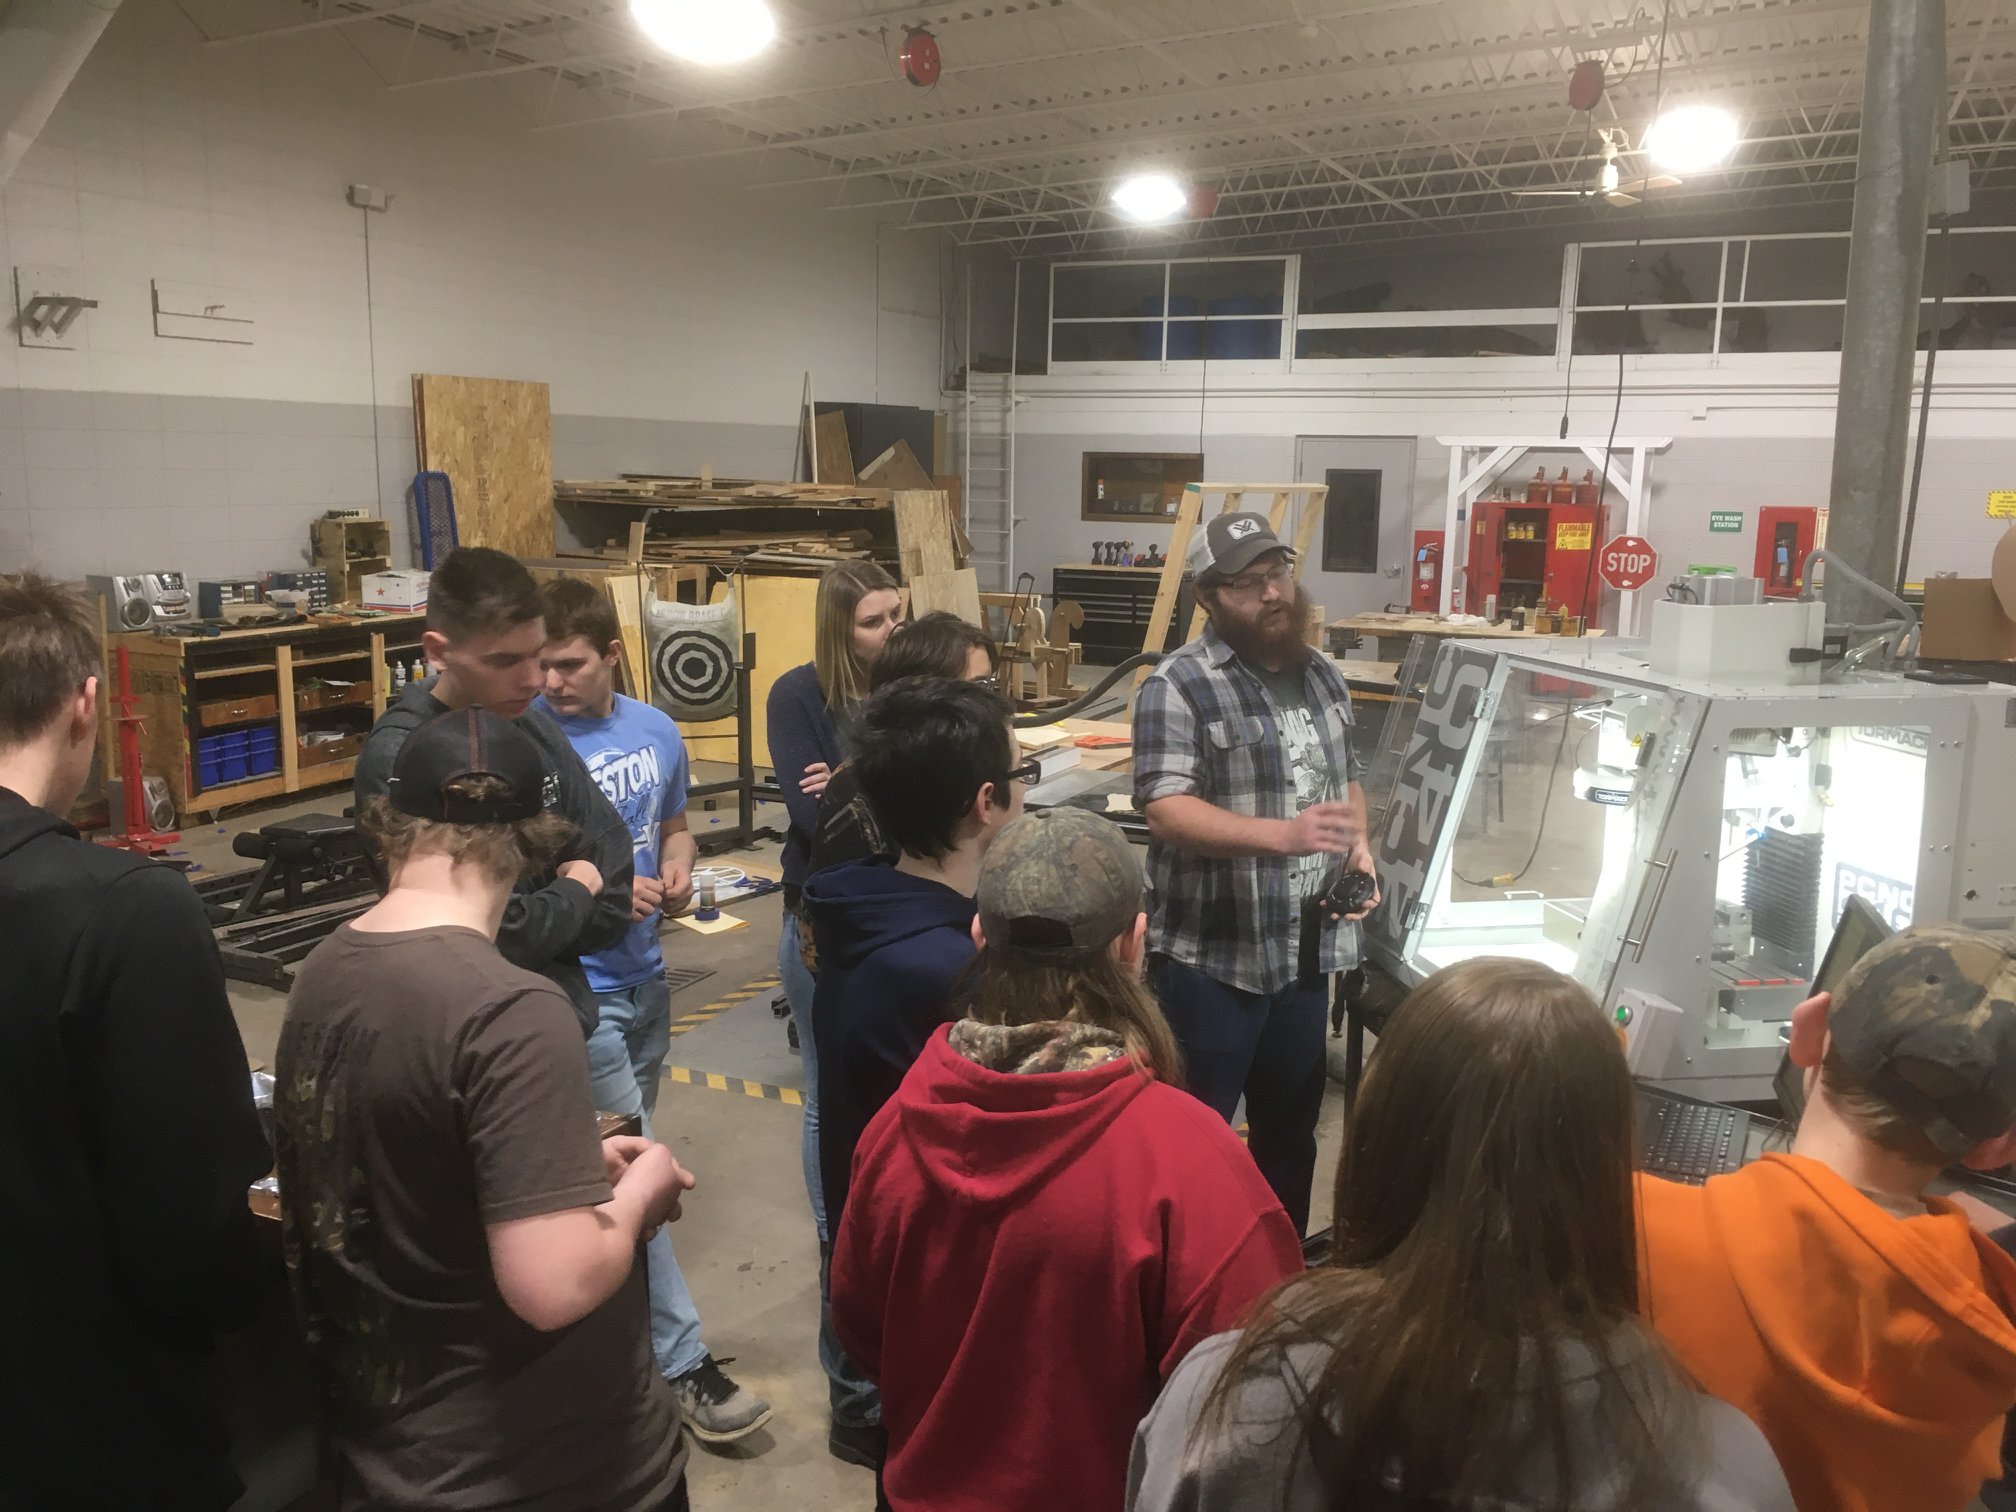 Students learning about technical fields